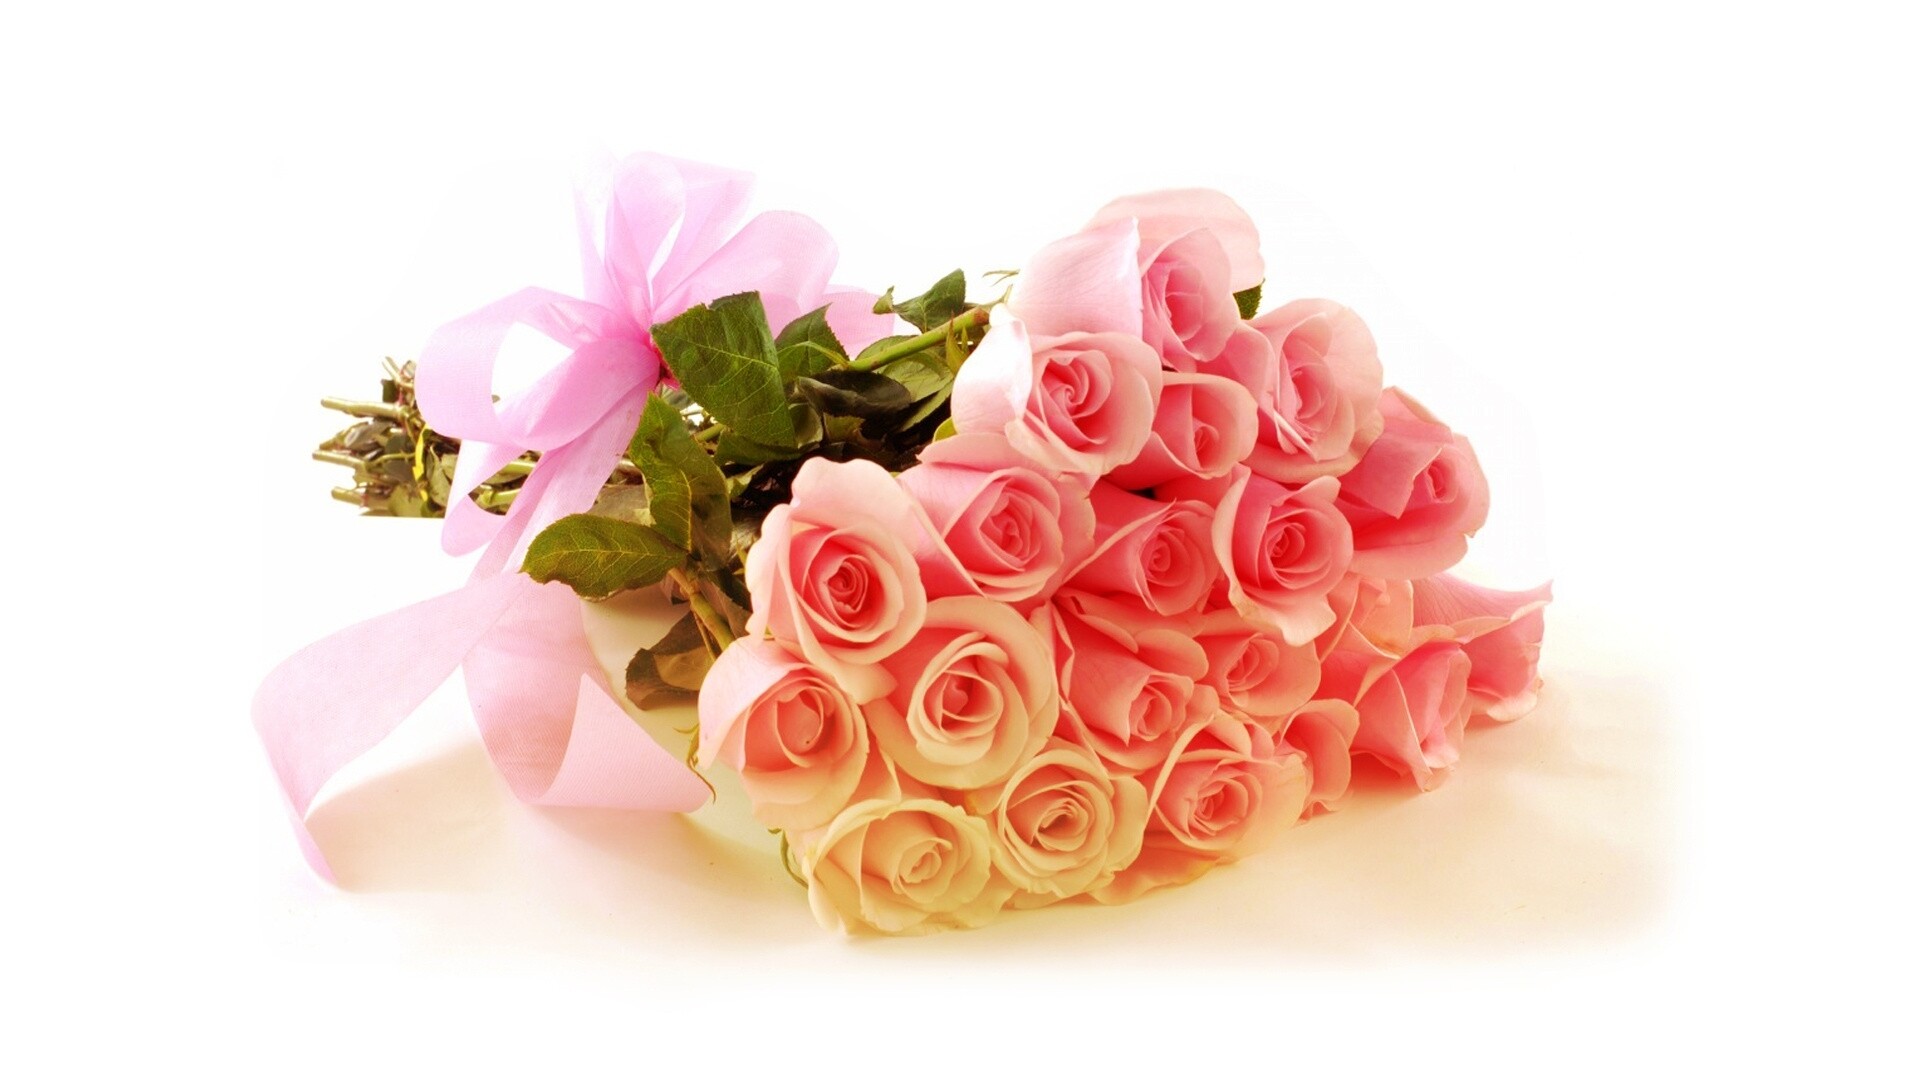 Flower Bouquet: Garden roses, Flowers cut and tied together. 1920x1080 Full HD Background.